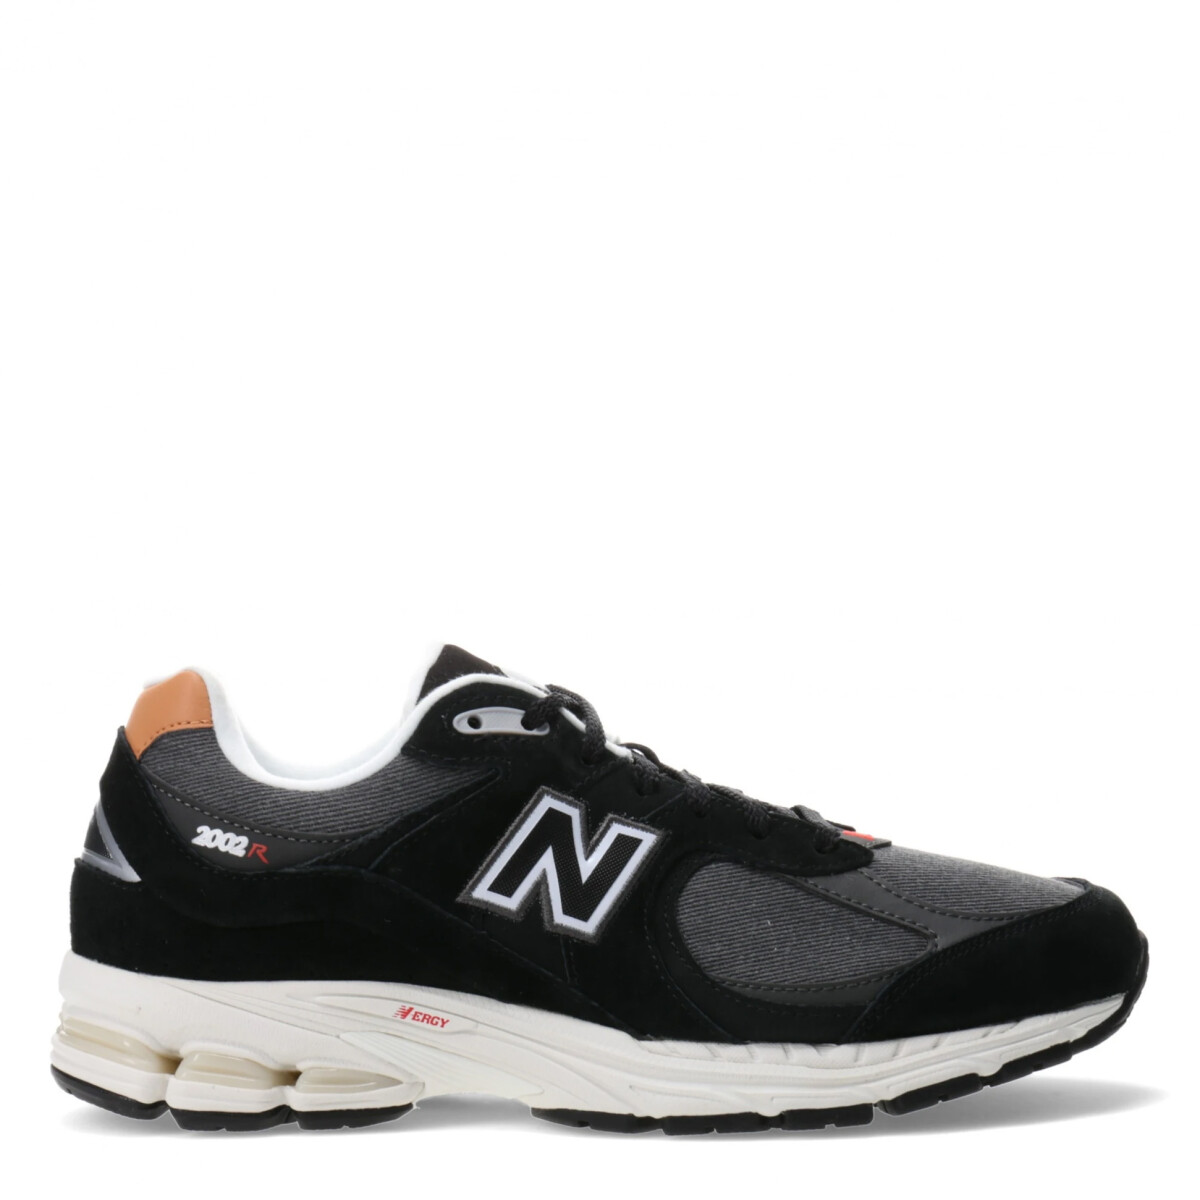 Classic Traditionnels New Balance - Negro/Gris/Camel 